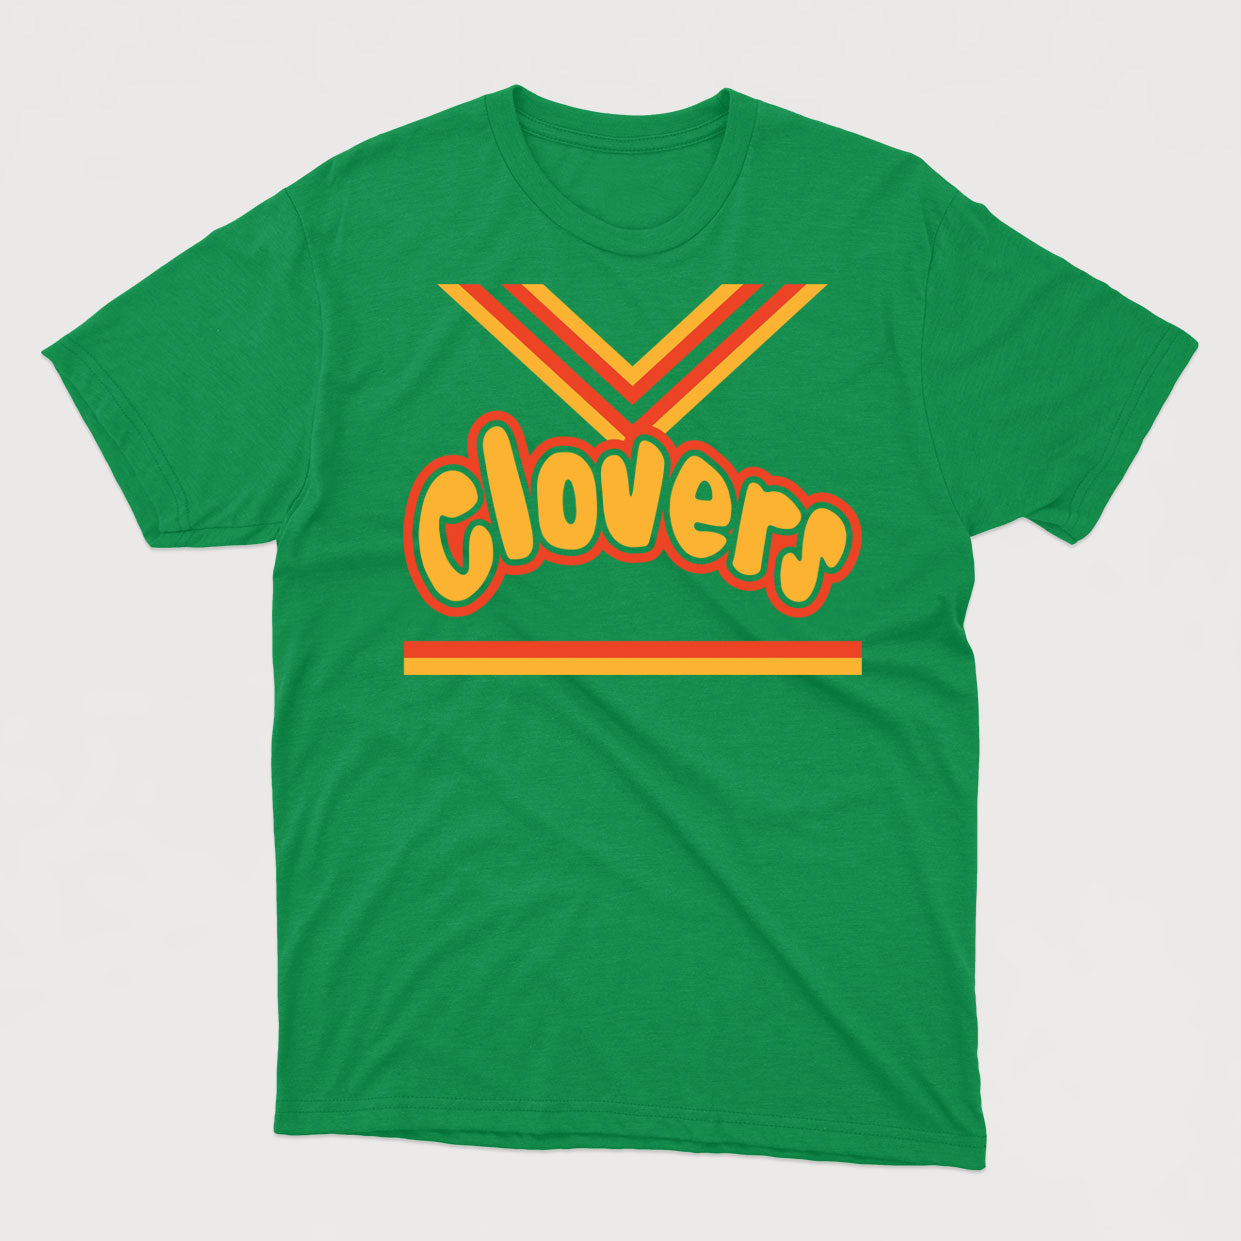 Bring it on (Toros and Clovers) t-shirt unisexe - tamelo boutique